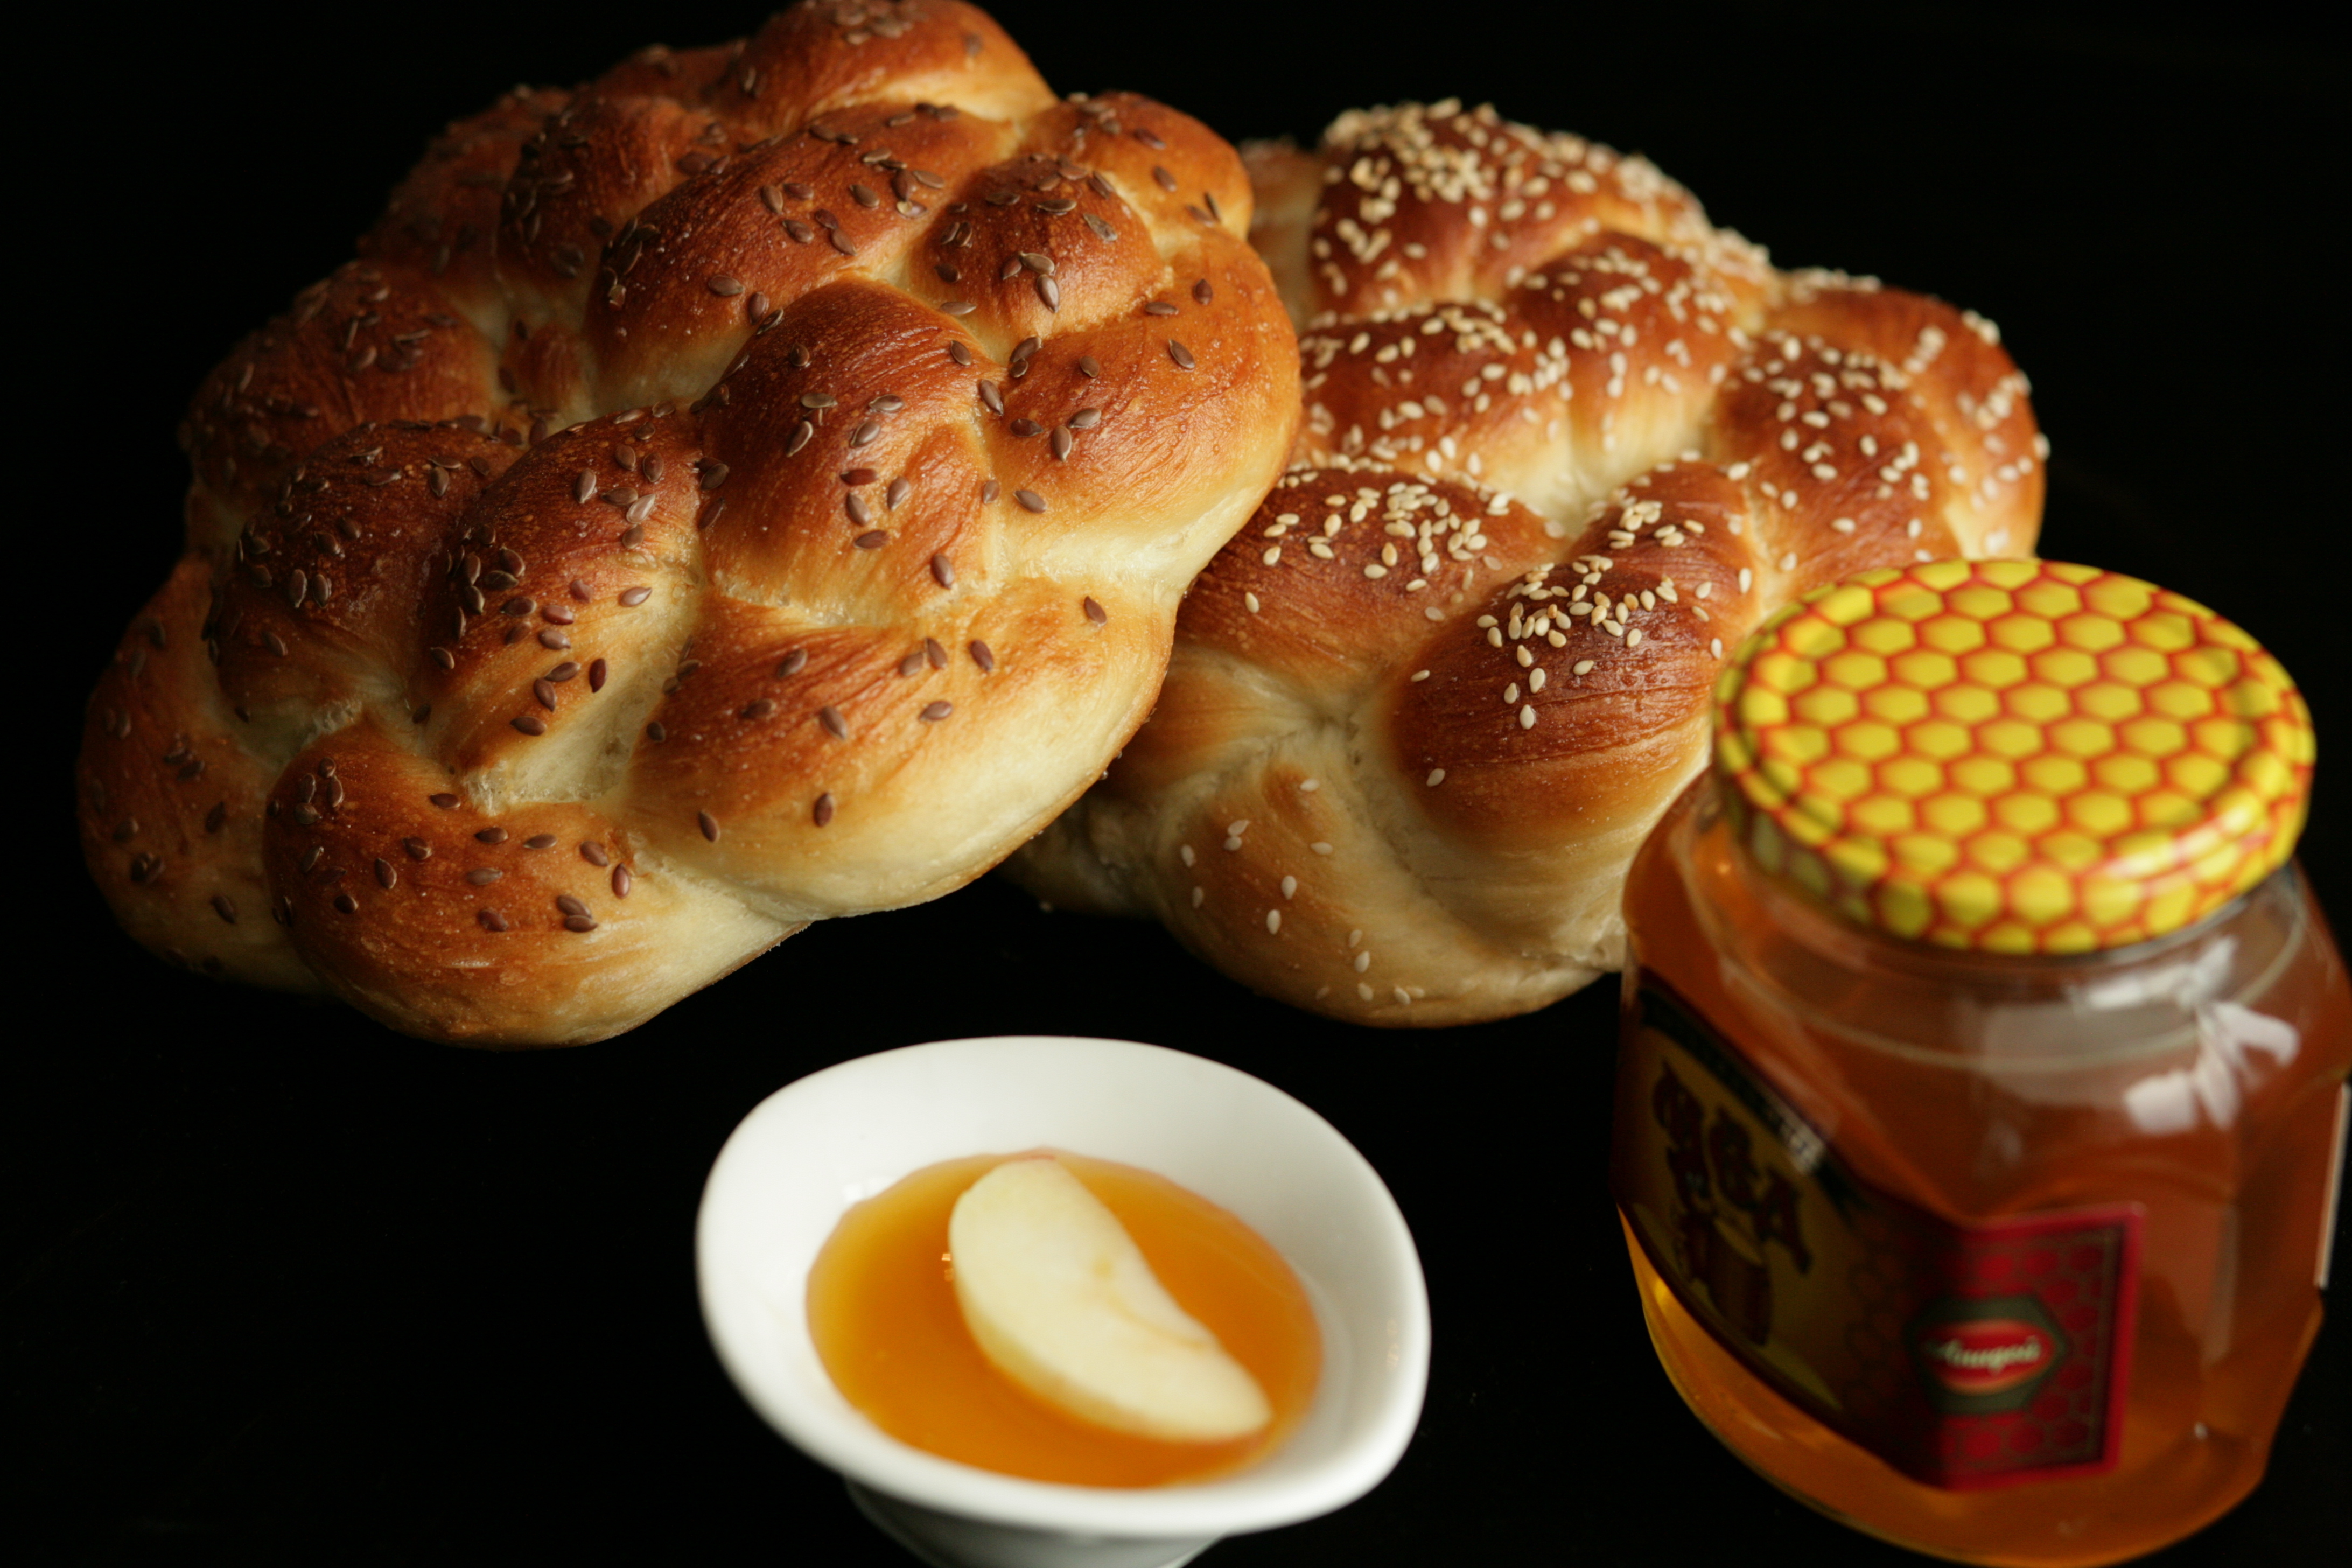 Two round braided challah next to a bowl of honey with a single apple slice in it and a jar of honey, on a black background. 